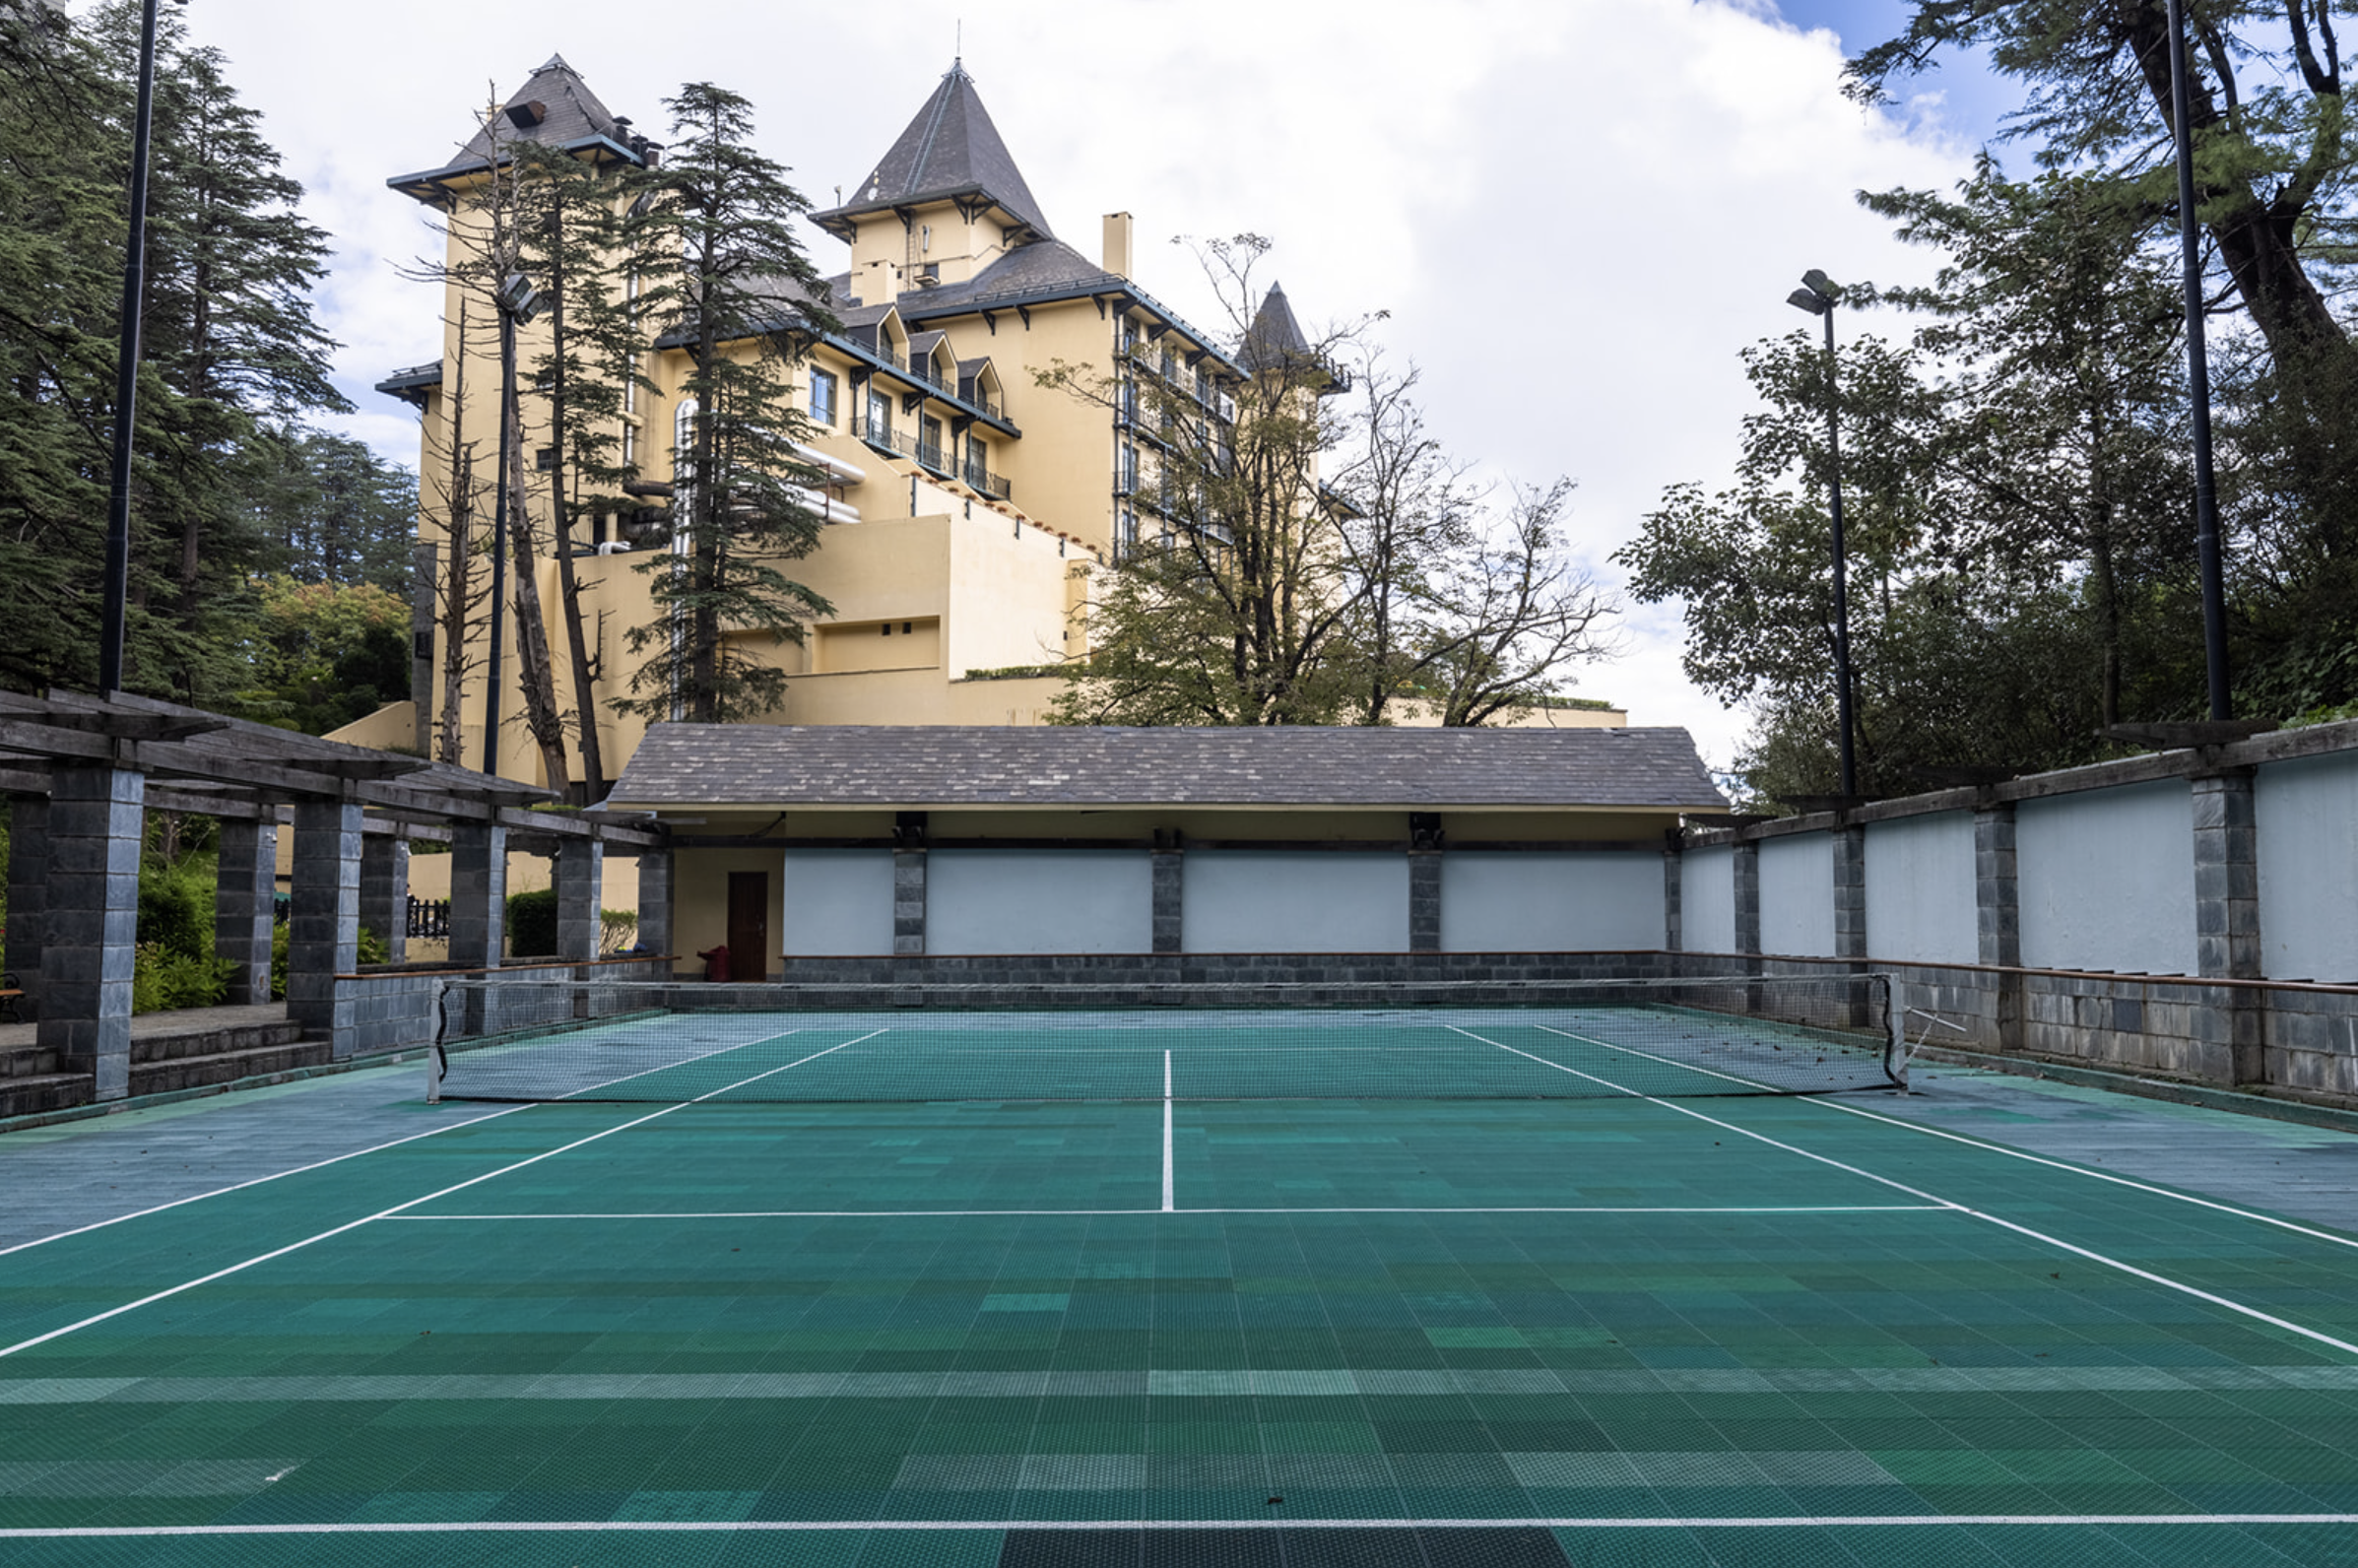 The hotel is set in 22 acres of pine and cedar woods, so playing tennis here is a serene experience